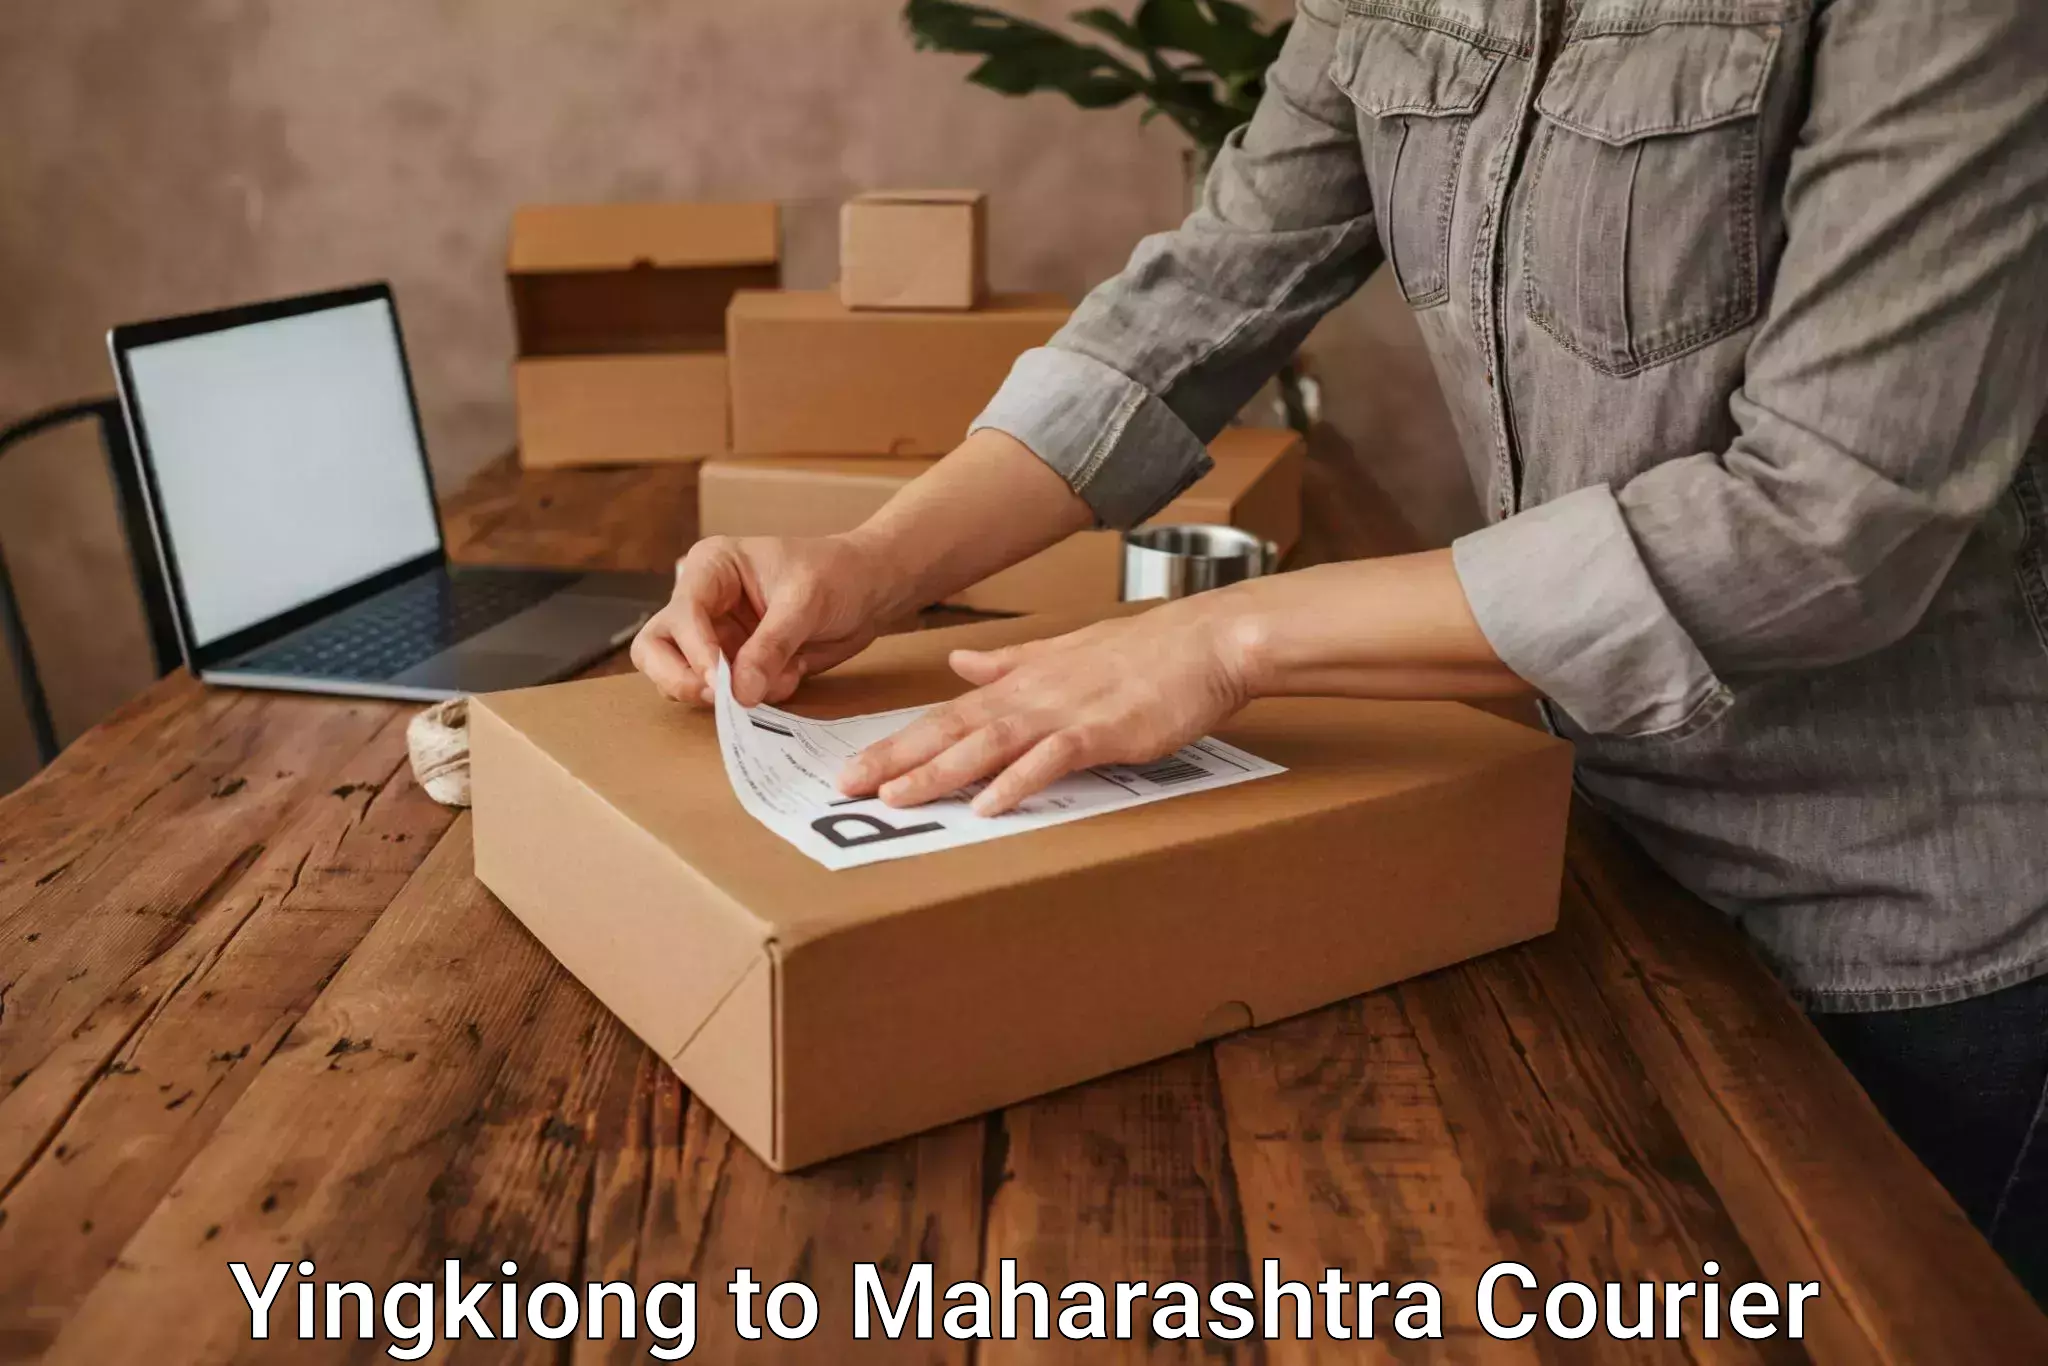 User-friendly delivery service Yingkiong to Maharashtra